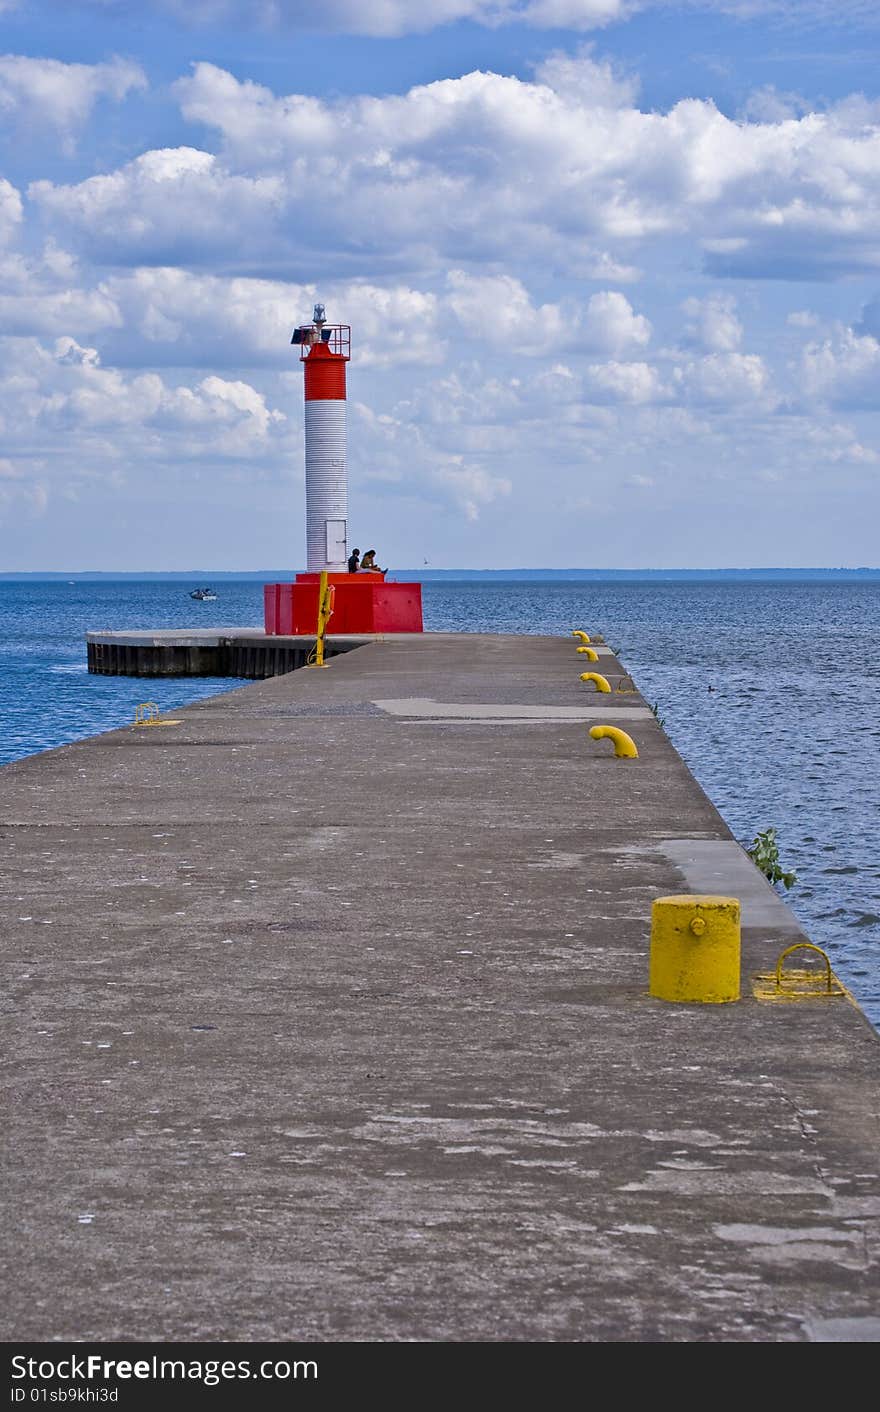 Crisp red lighthouse on the pier in Oakville, Ontario. Taken on a sunny day with mixed cloud cover.